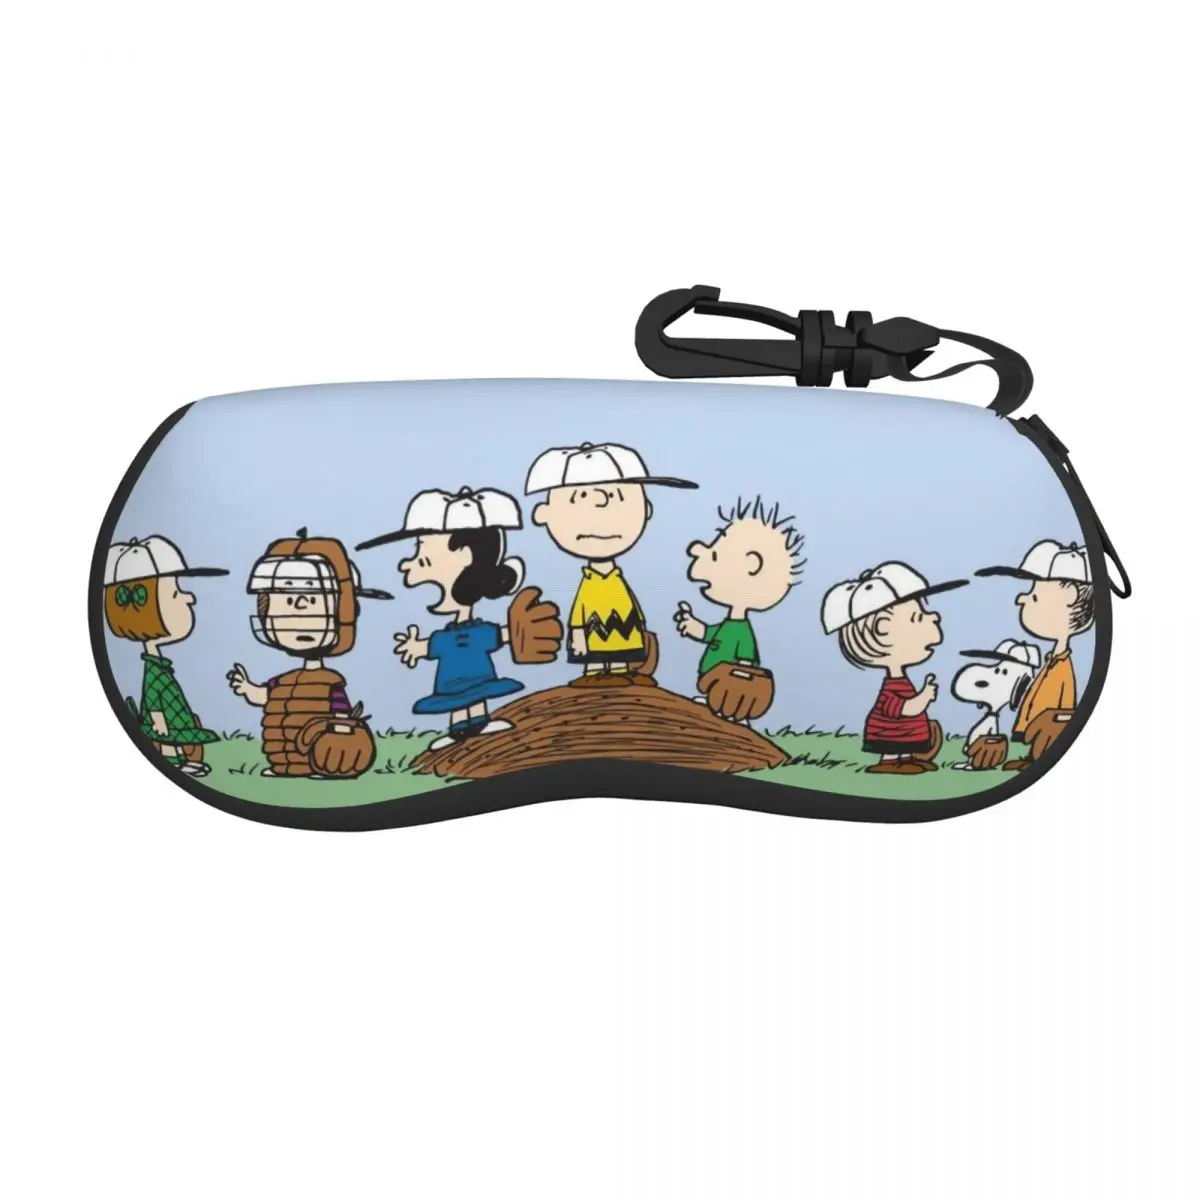 

Peanuts Comic Characters Glasses Case Men Women Convenient Box Snoopy Charlie Brown Glasses Storage Box Small Eye Contacts Case